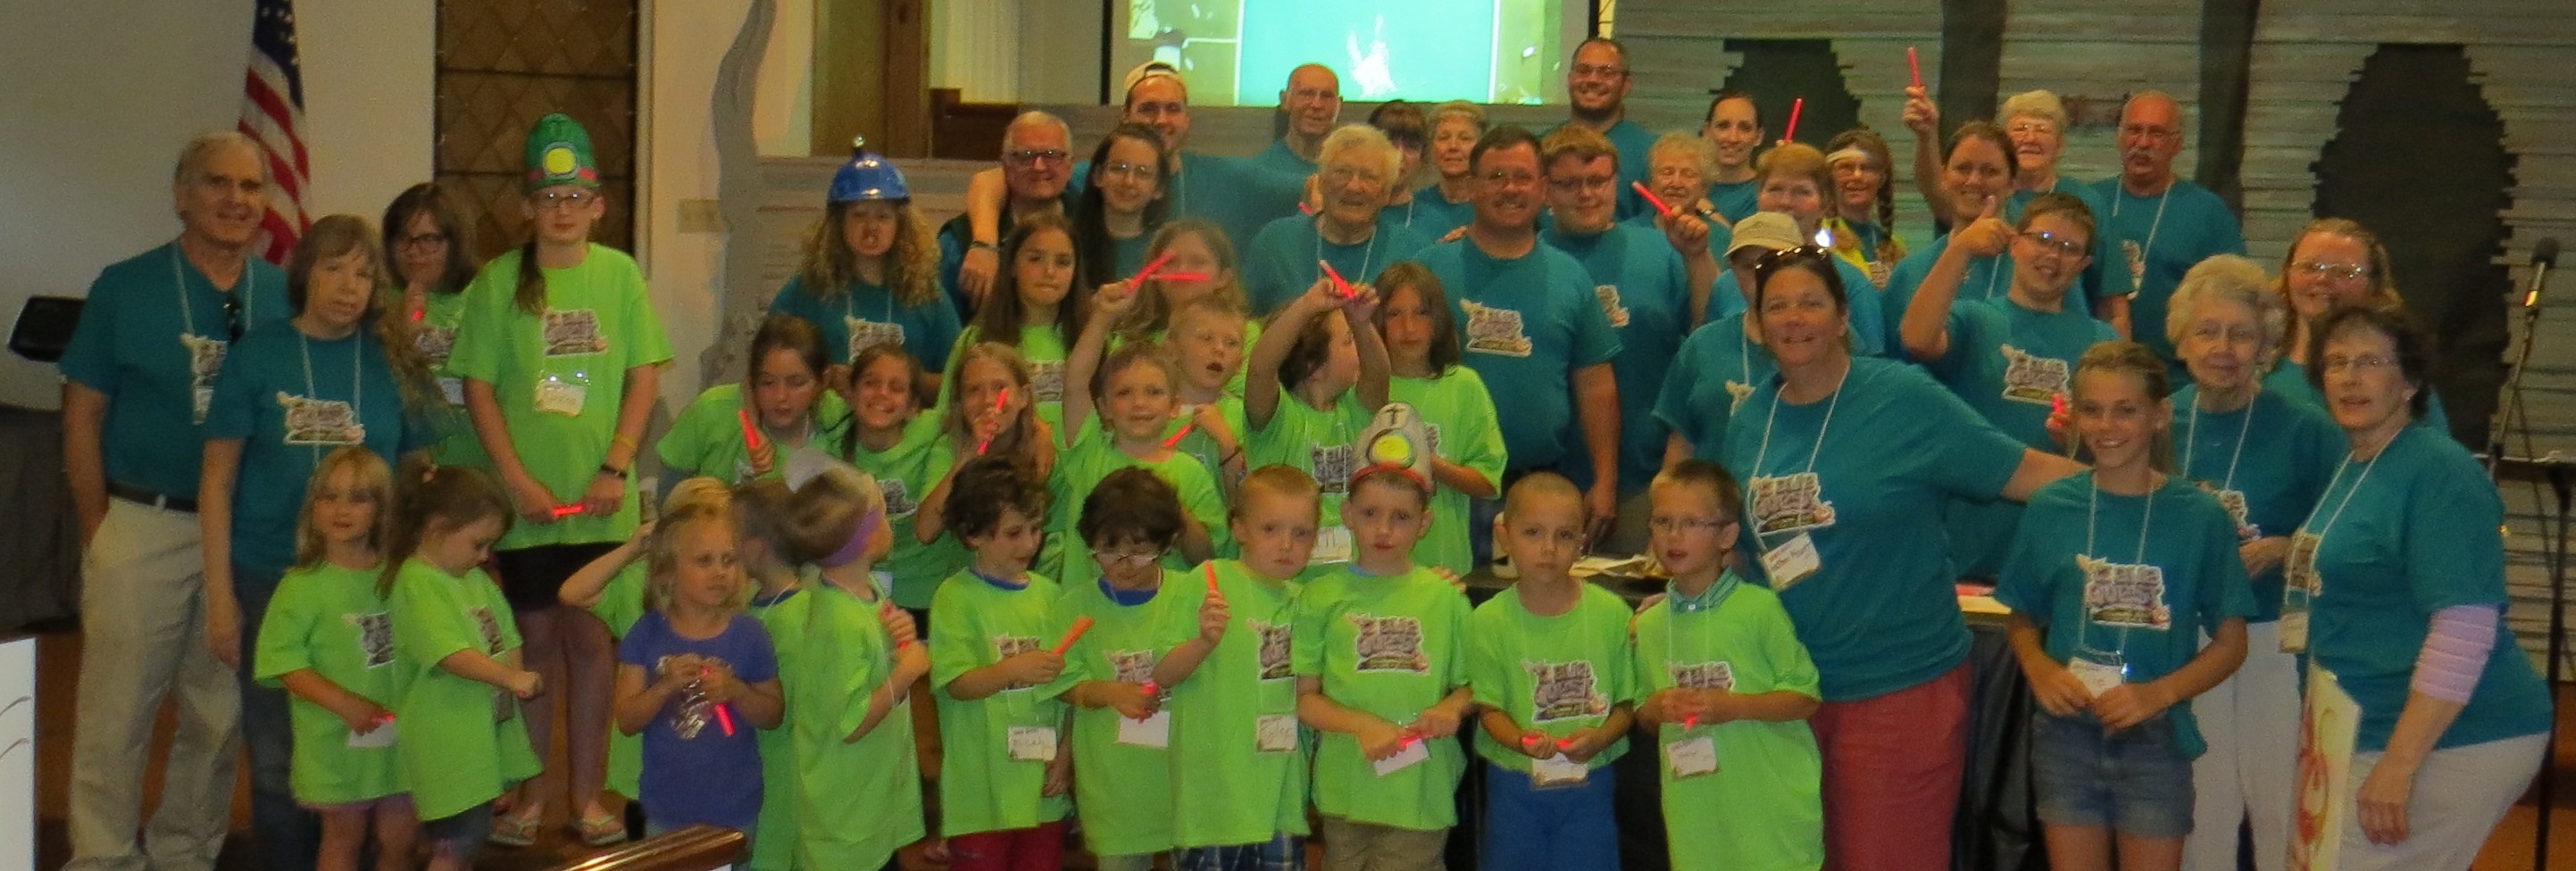 VBS 2017 Group Photo for Website